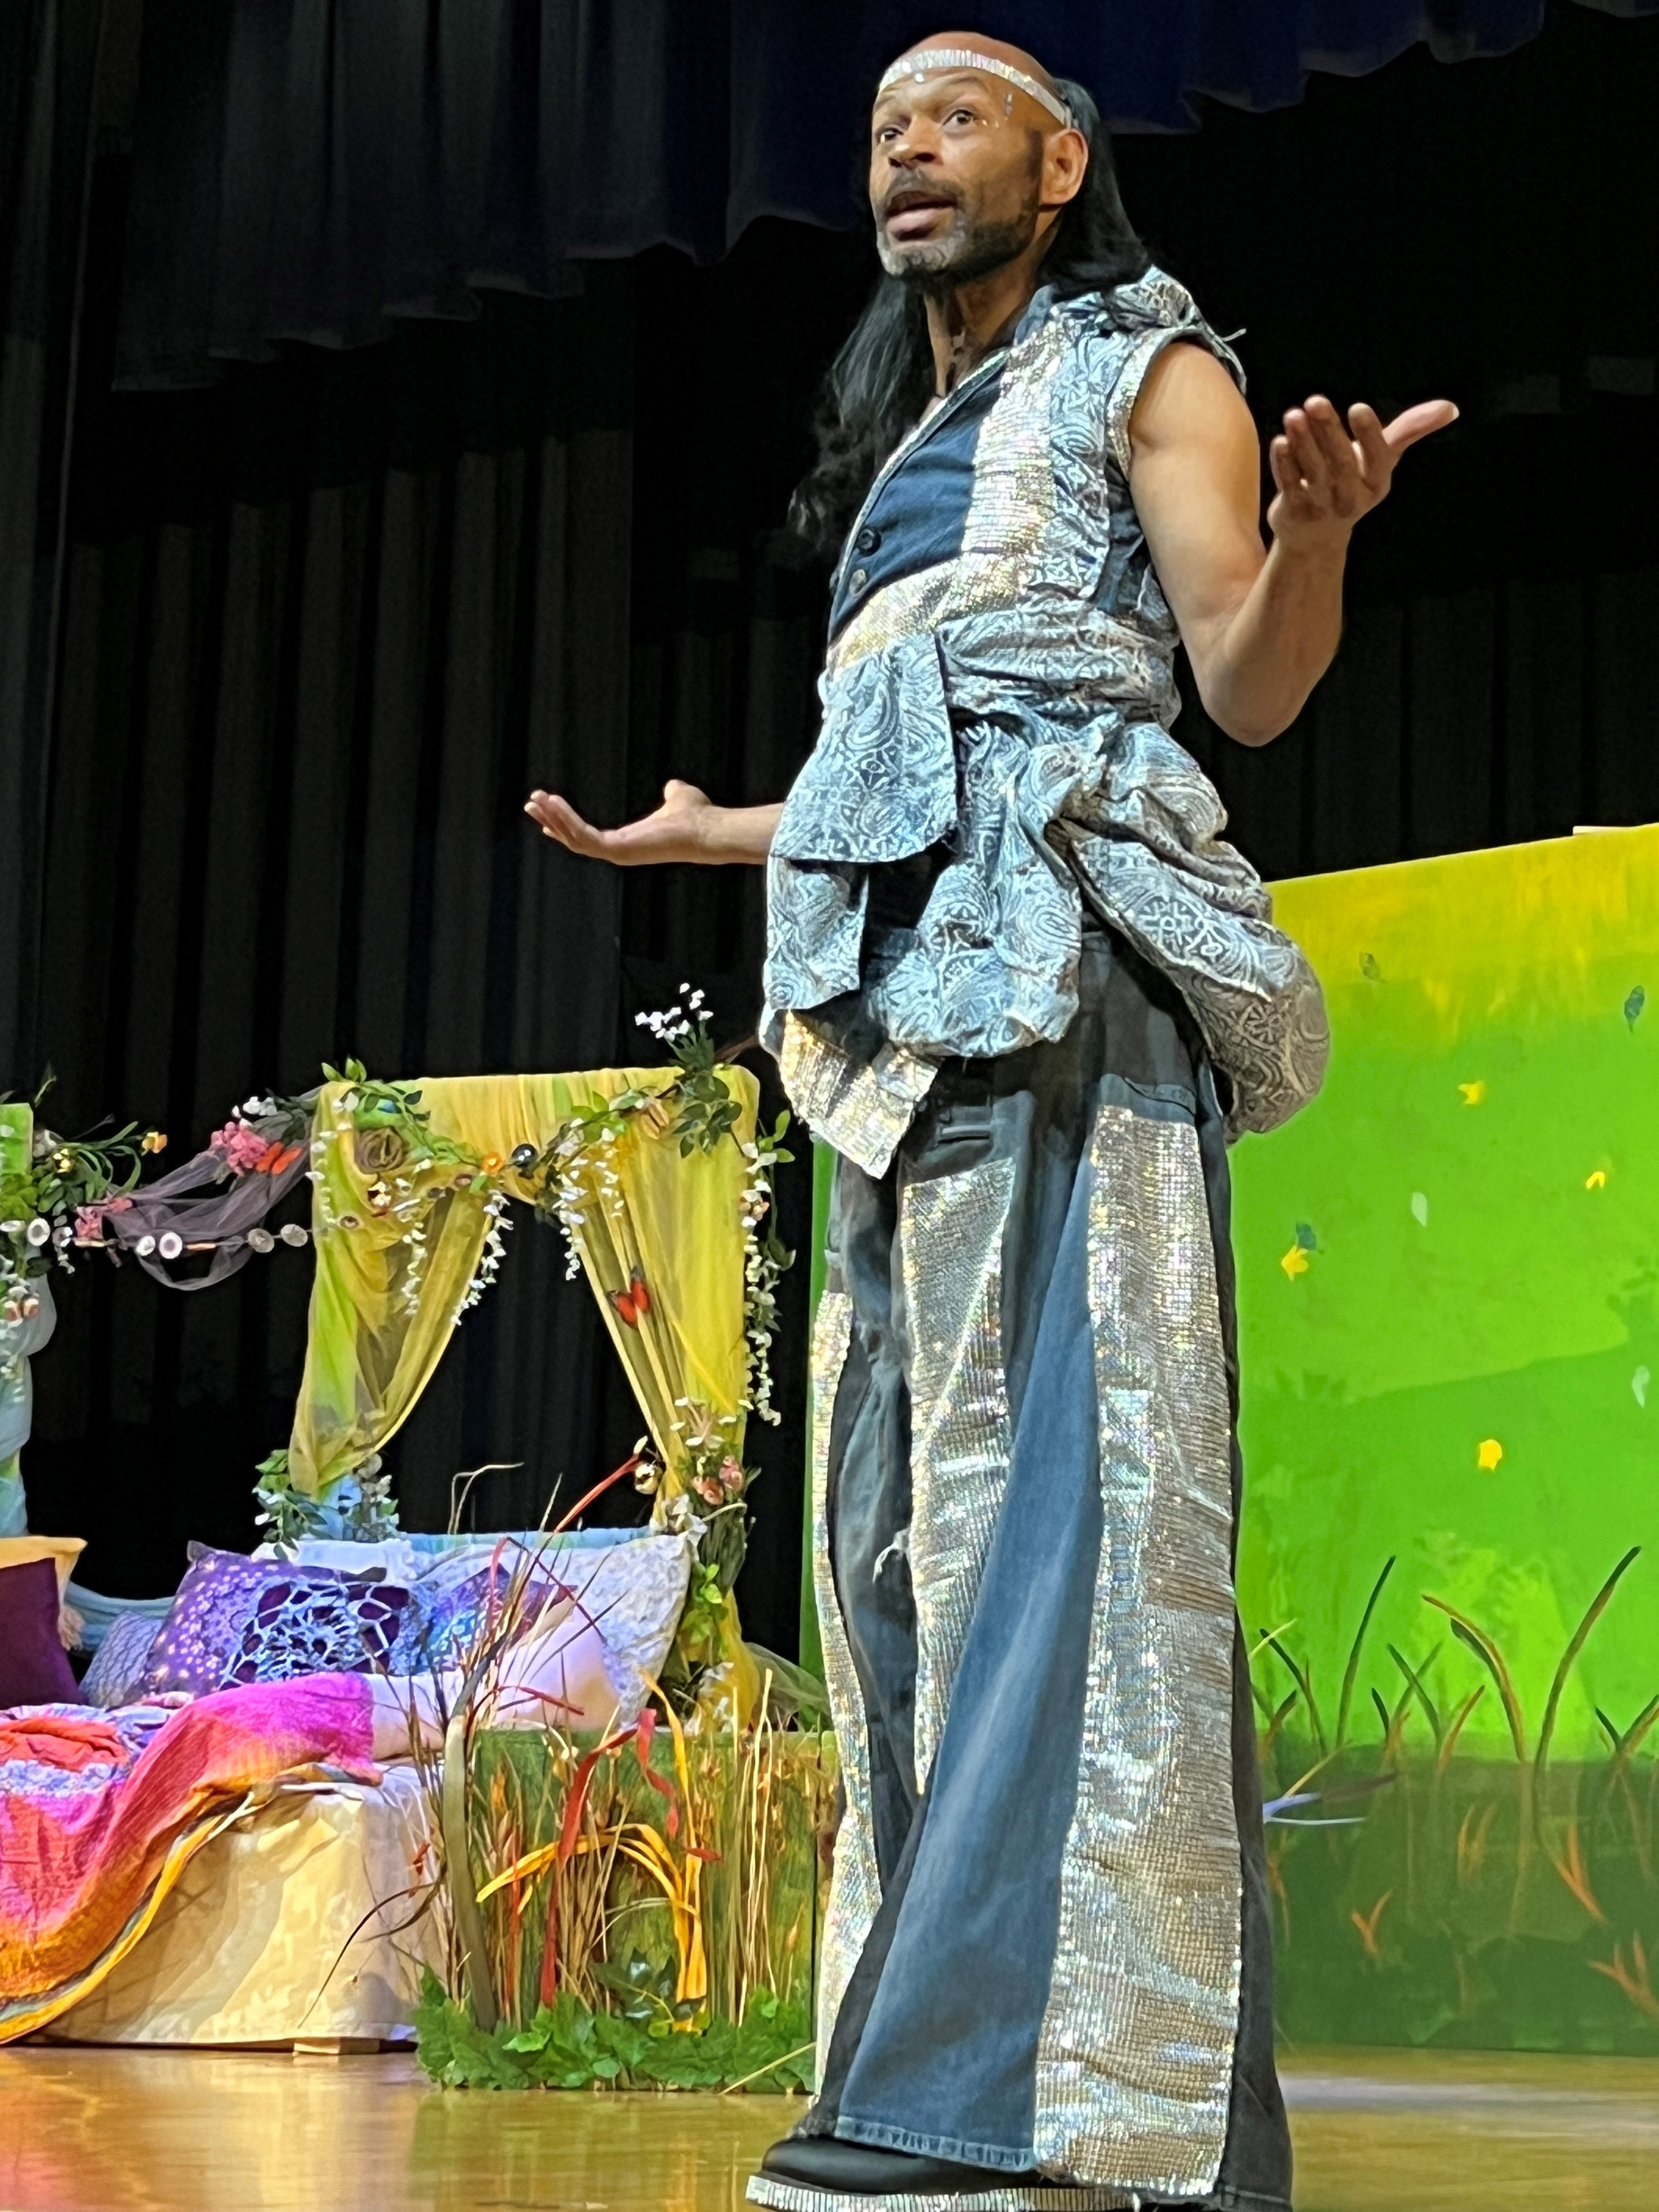 An actor stands on stage, rehearsing a scene from "A Midsummer Night's Dream"